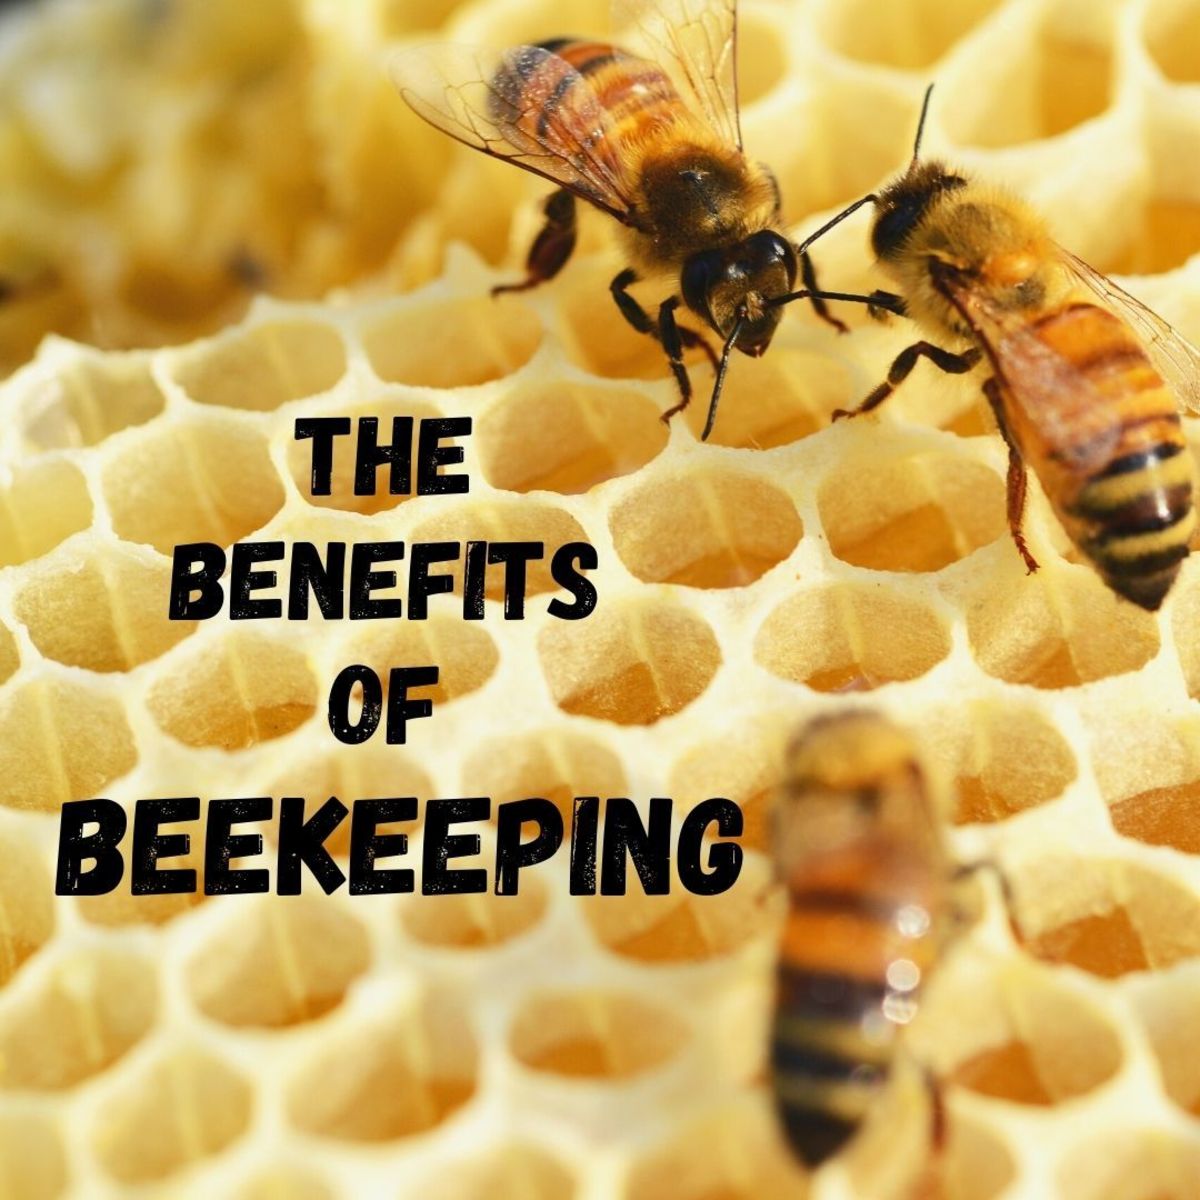 What are the benefits of beekeeping?